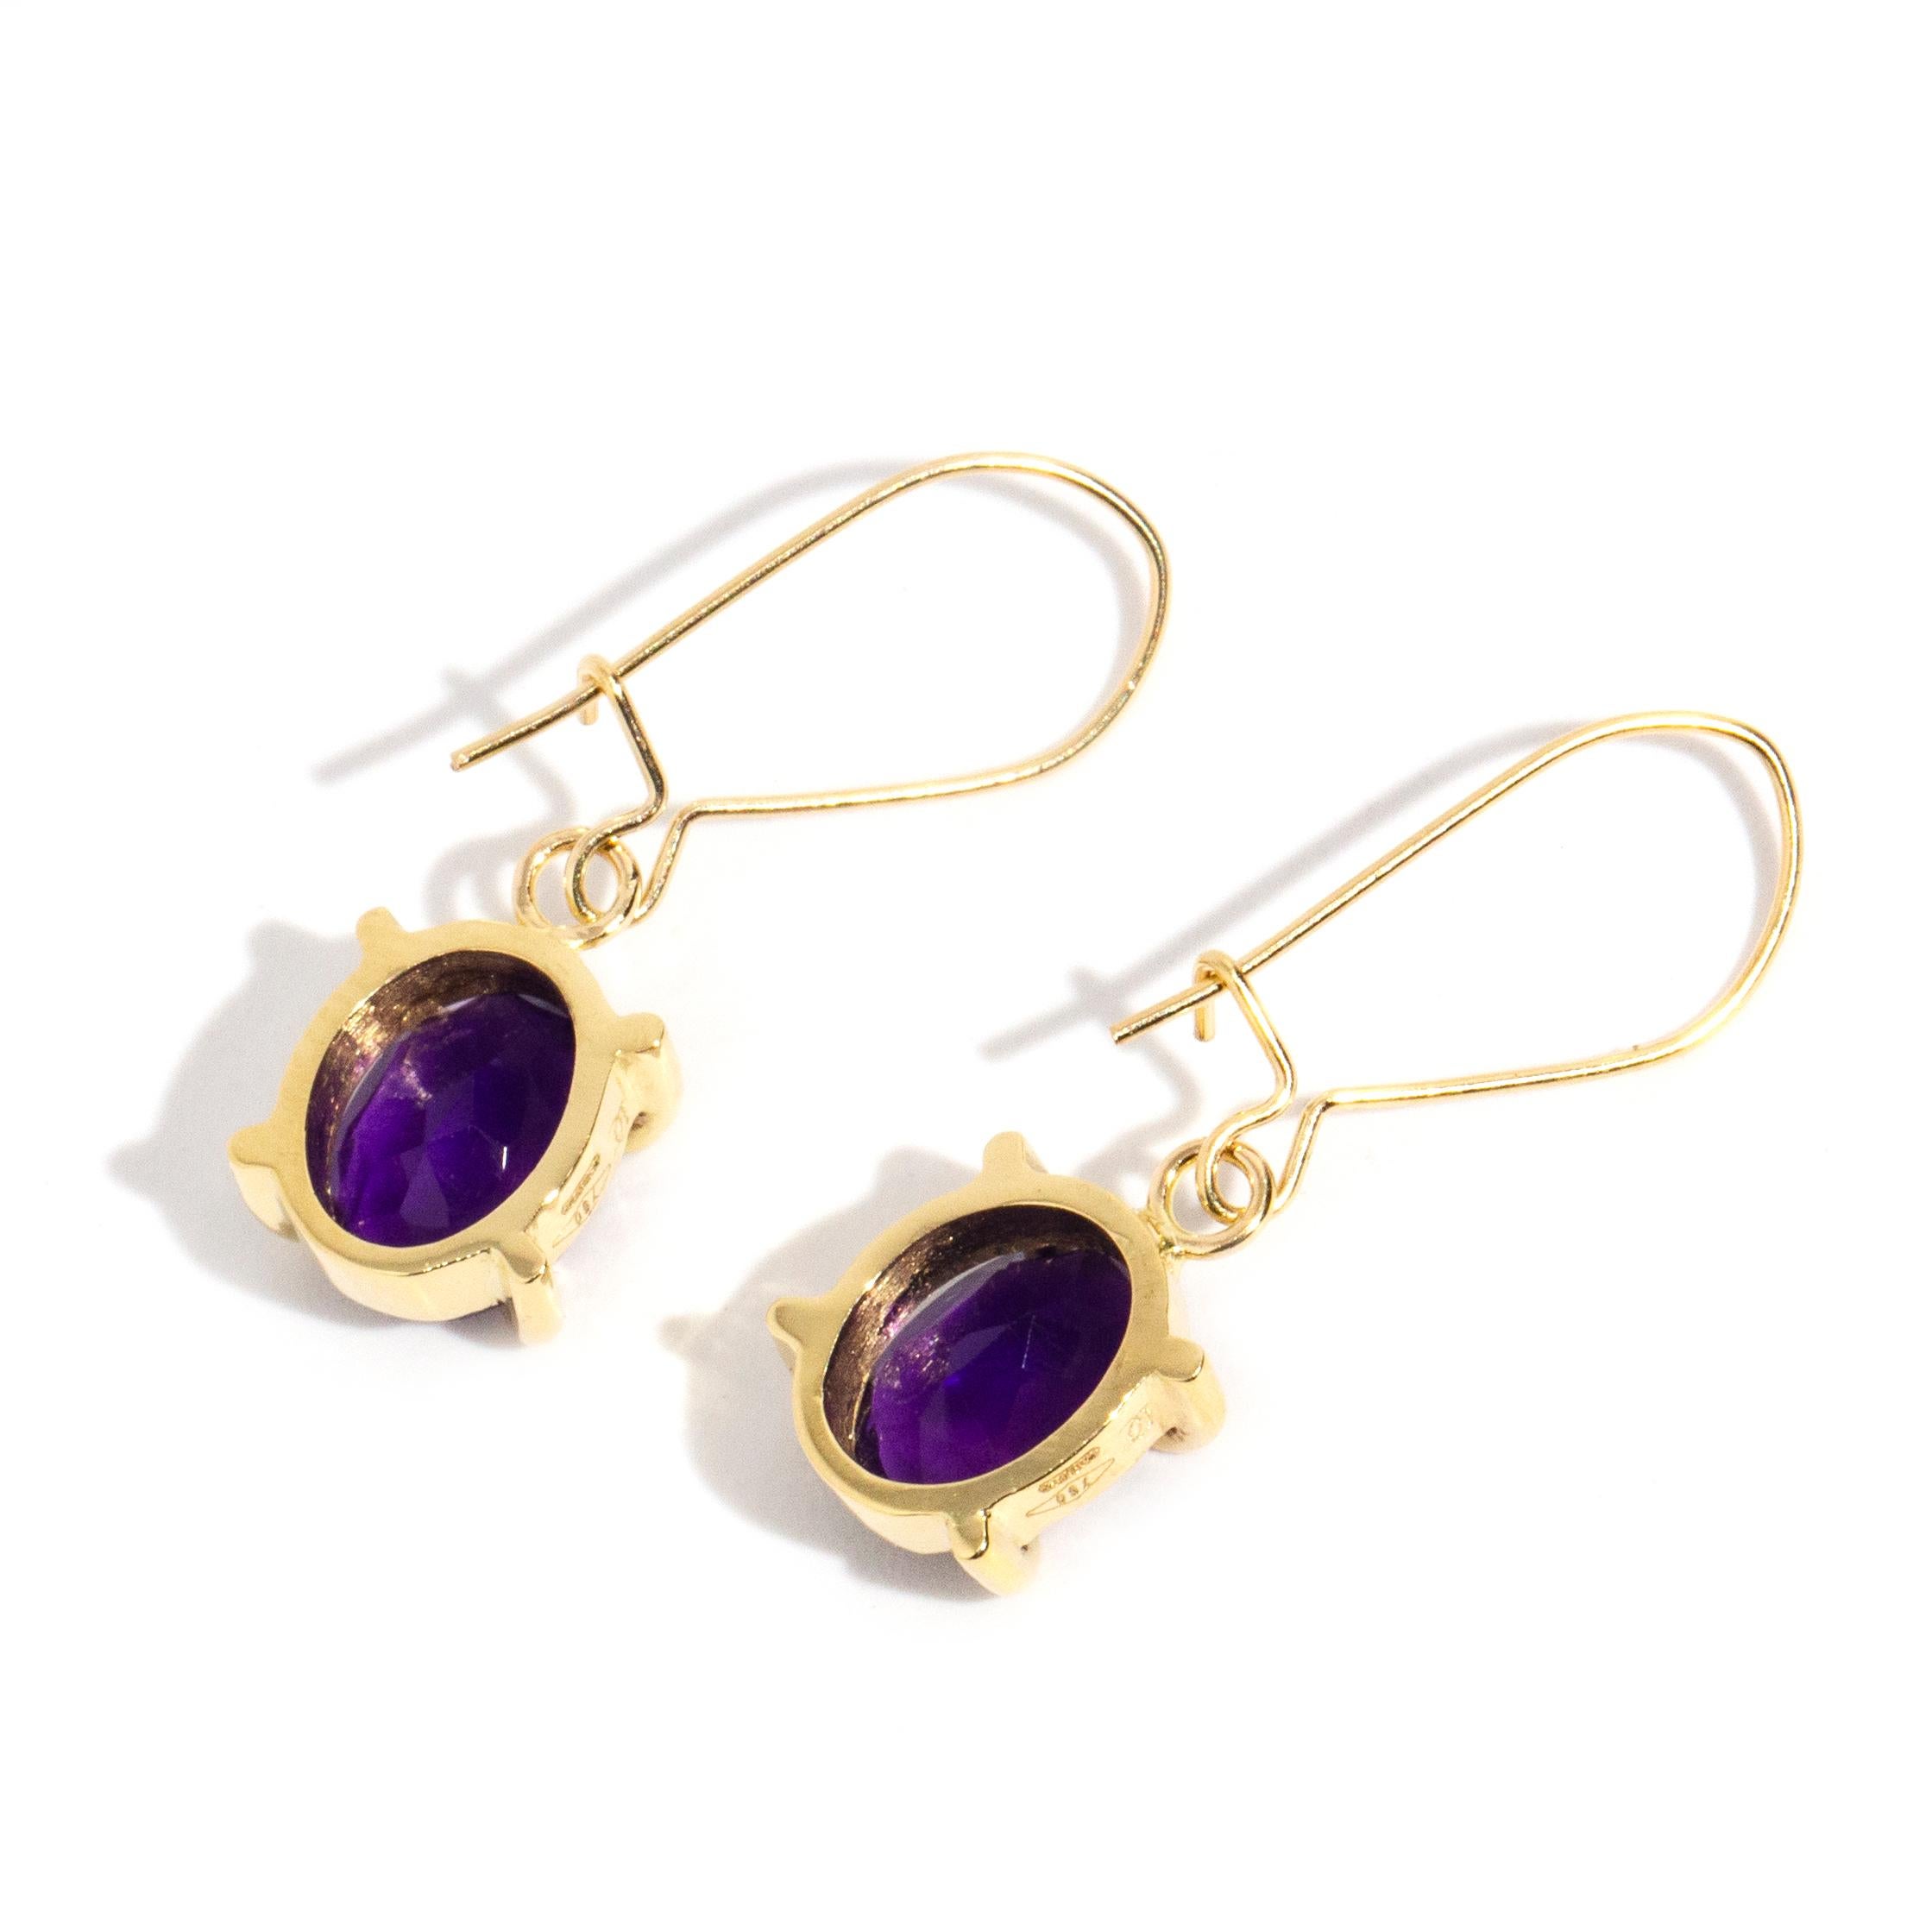 Women's Vintage Circa 1990s 9 Carat Yellow Gold Amethyst Continental Hook Style Earrings